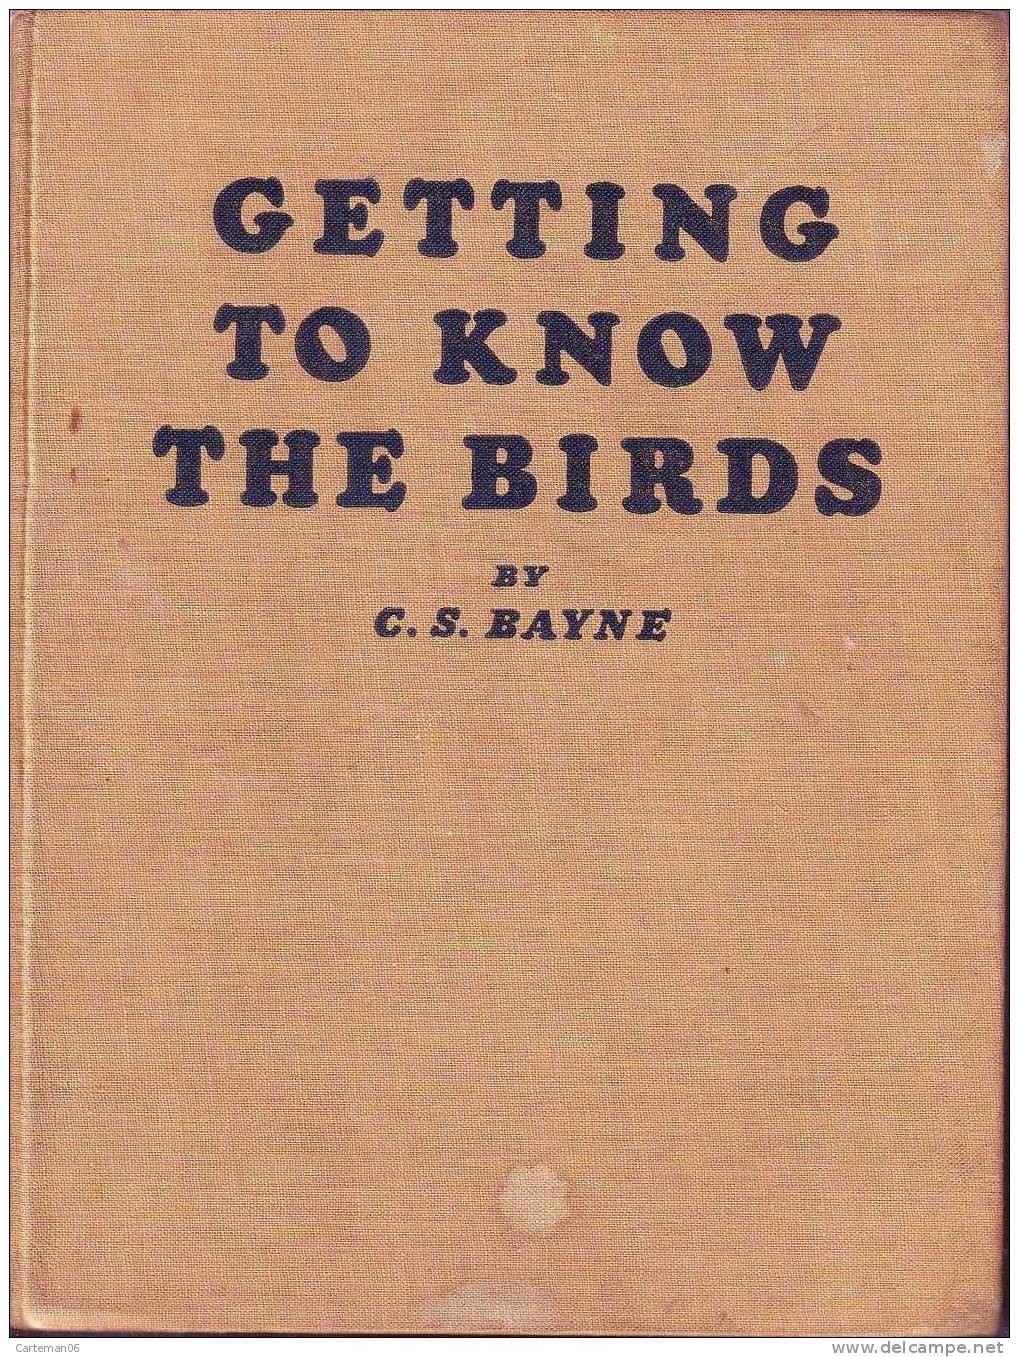 Livre - Getting To Know The Birds By C.S Bayne Illustrated By Ralston Gudgeon R.S.W 1944 (oiseaux) - Animaux